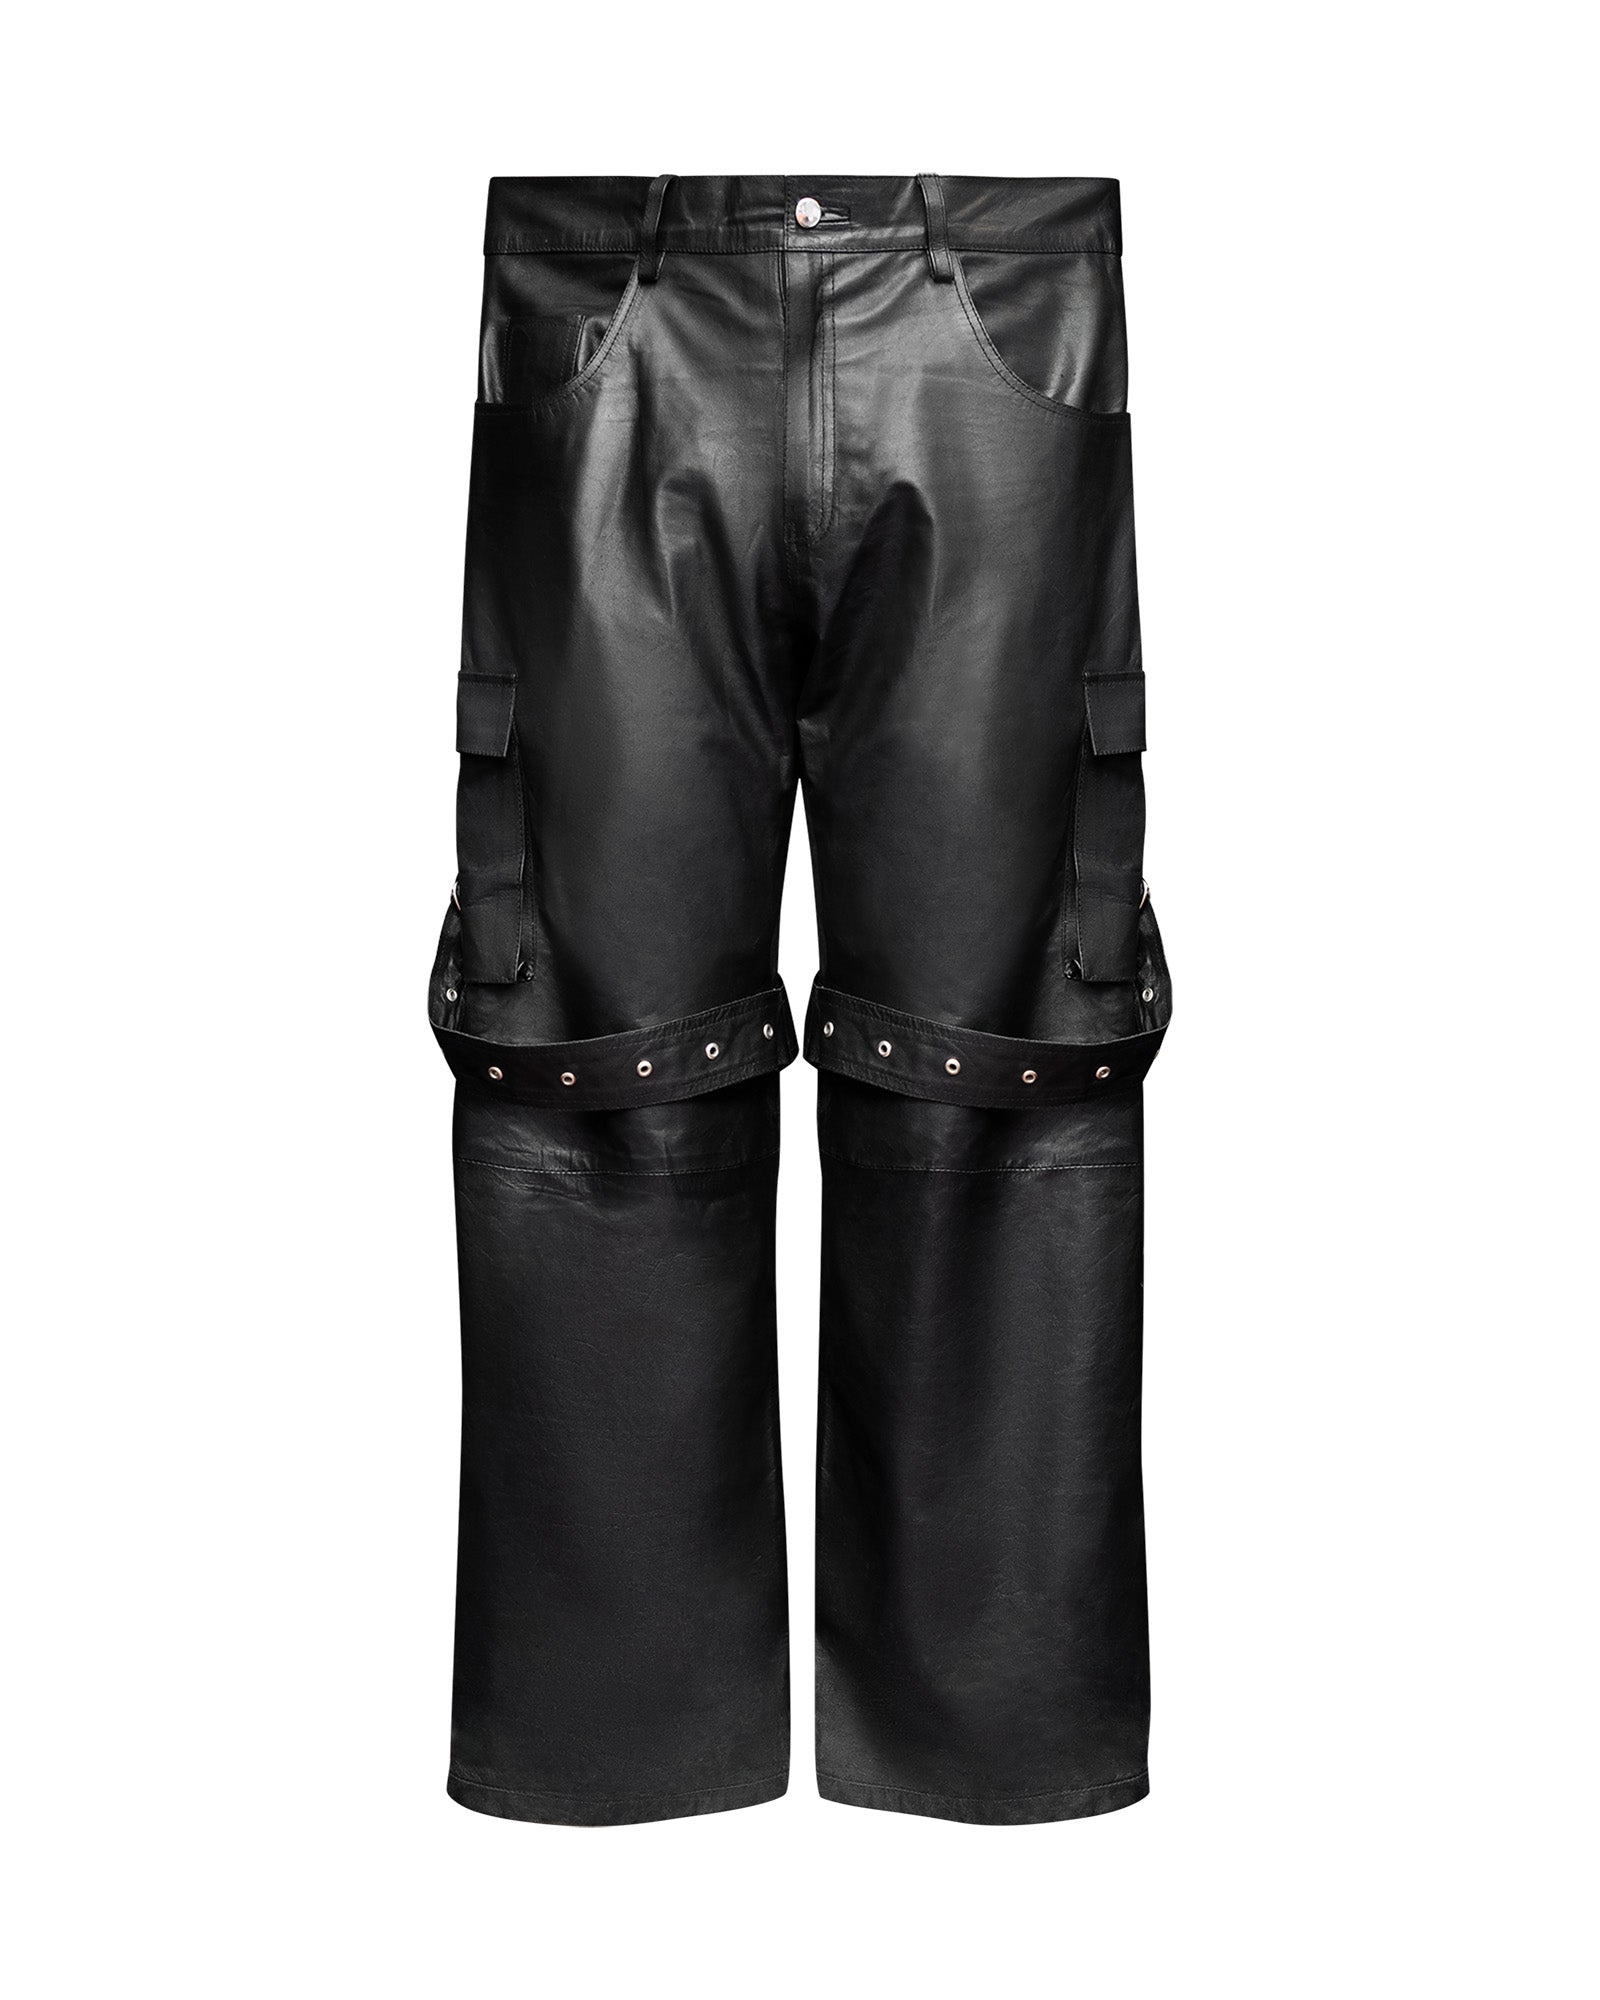 BOMBER REVERIE NAPPA LEATHER CARGO PANTS